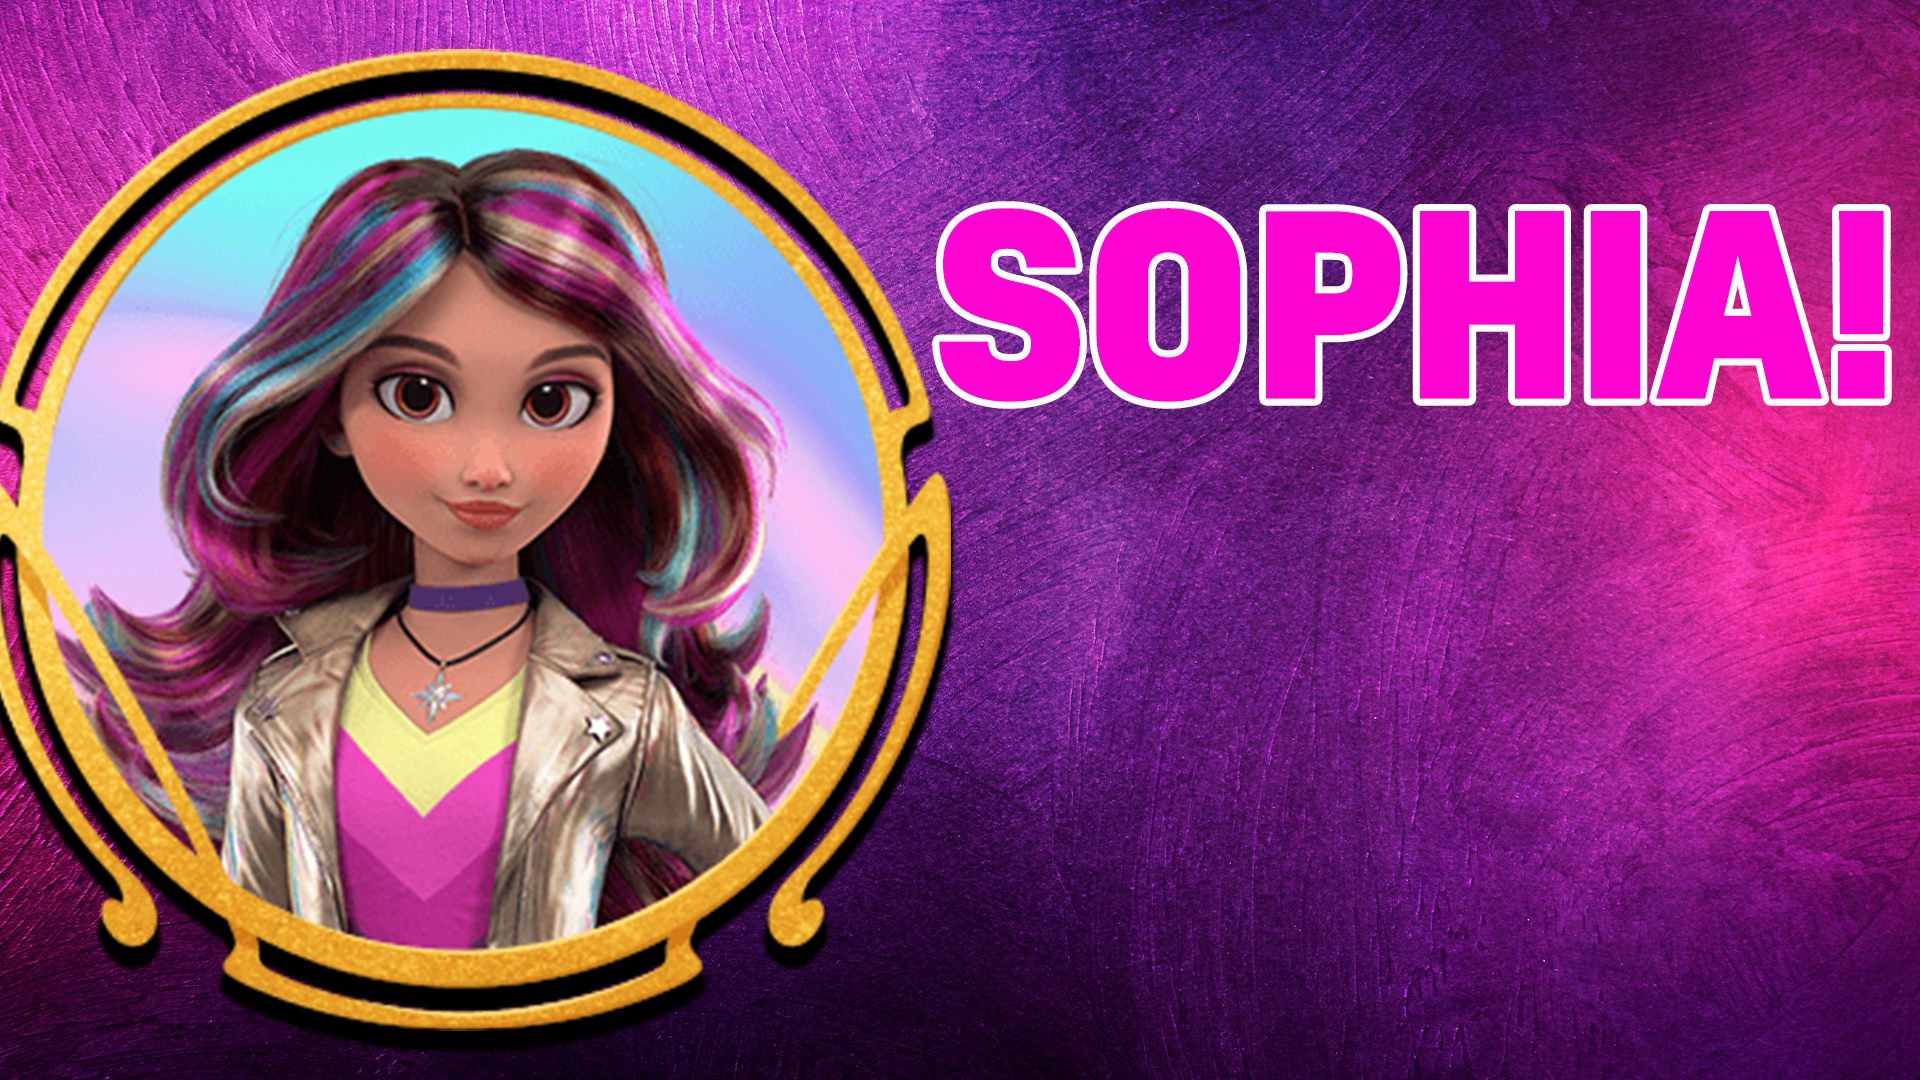 You're most like Sophia! You love to explore and discover new things! Although that sometimes gets you into trouble! You always speak your mind, and you love rainbows!